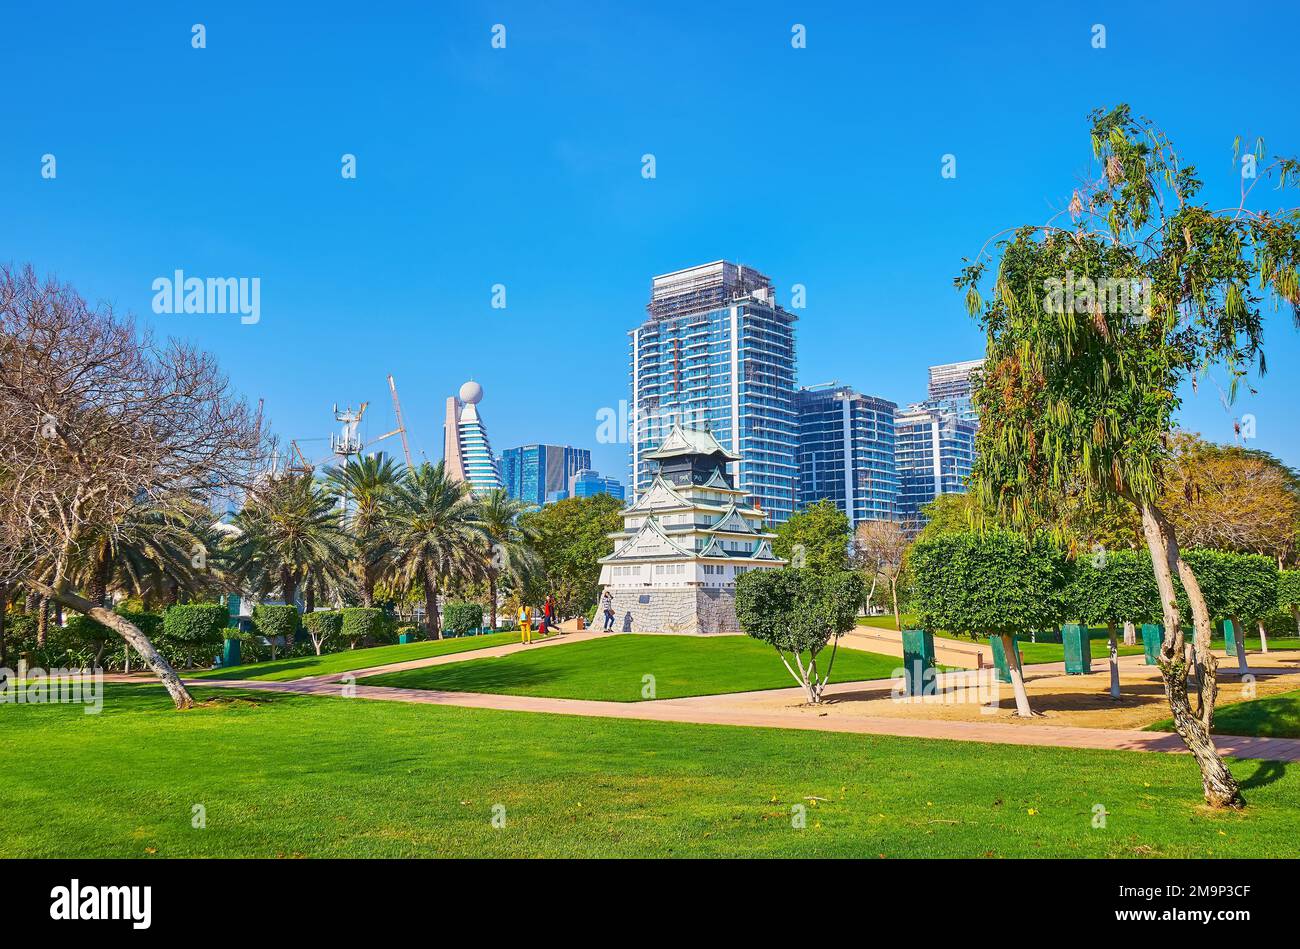 DUBAI, UAE - MARCH 6, 2020: Beautiful green Zabeel Park with model of Osaka Castle, modern glass buildings of Park Gate Residence Towers and Etisalat Stock Photo